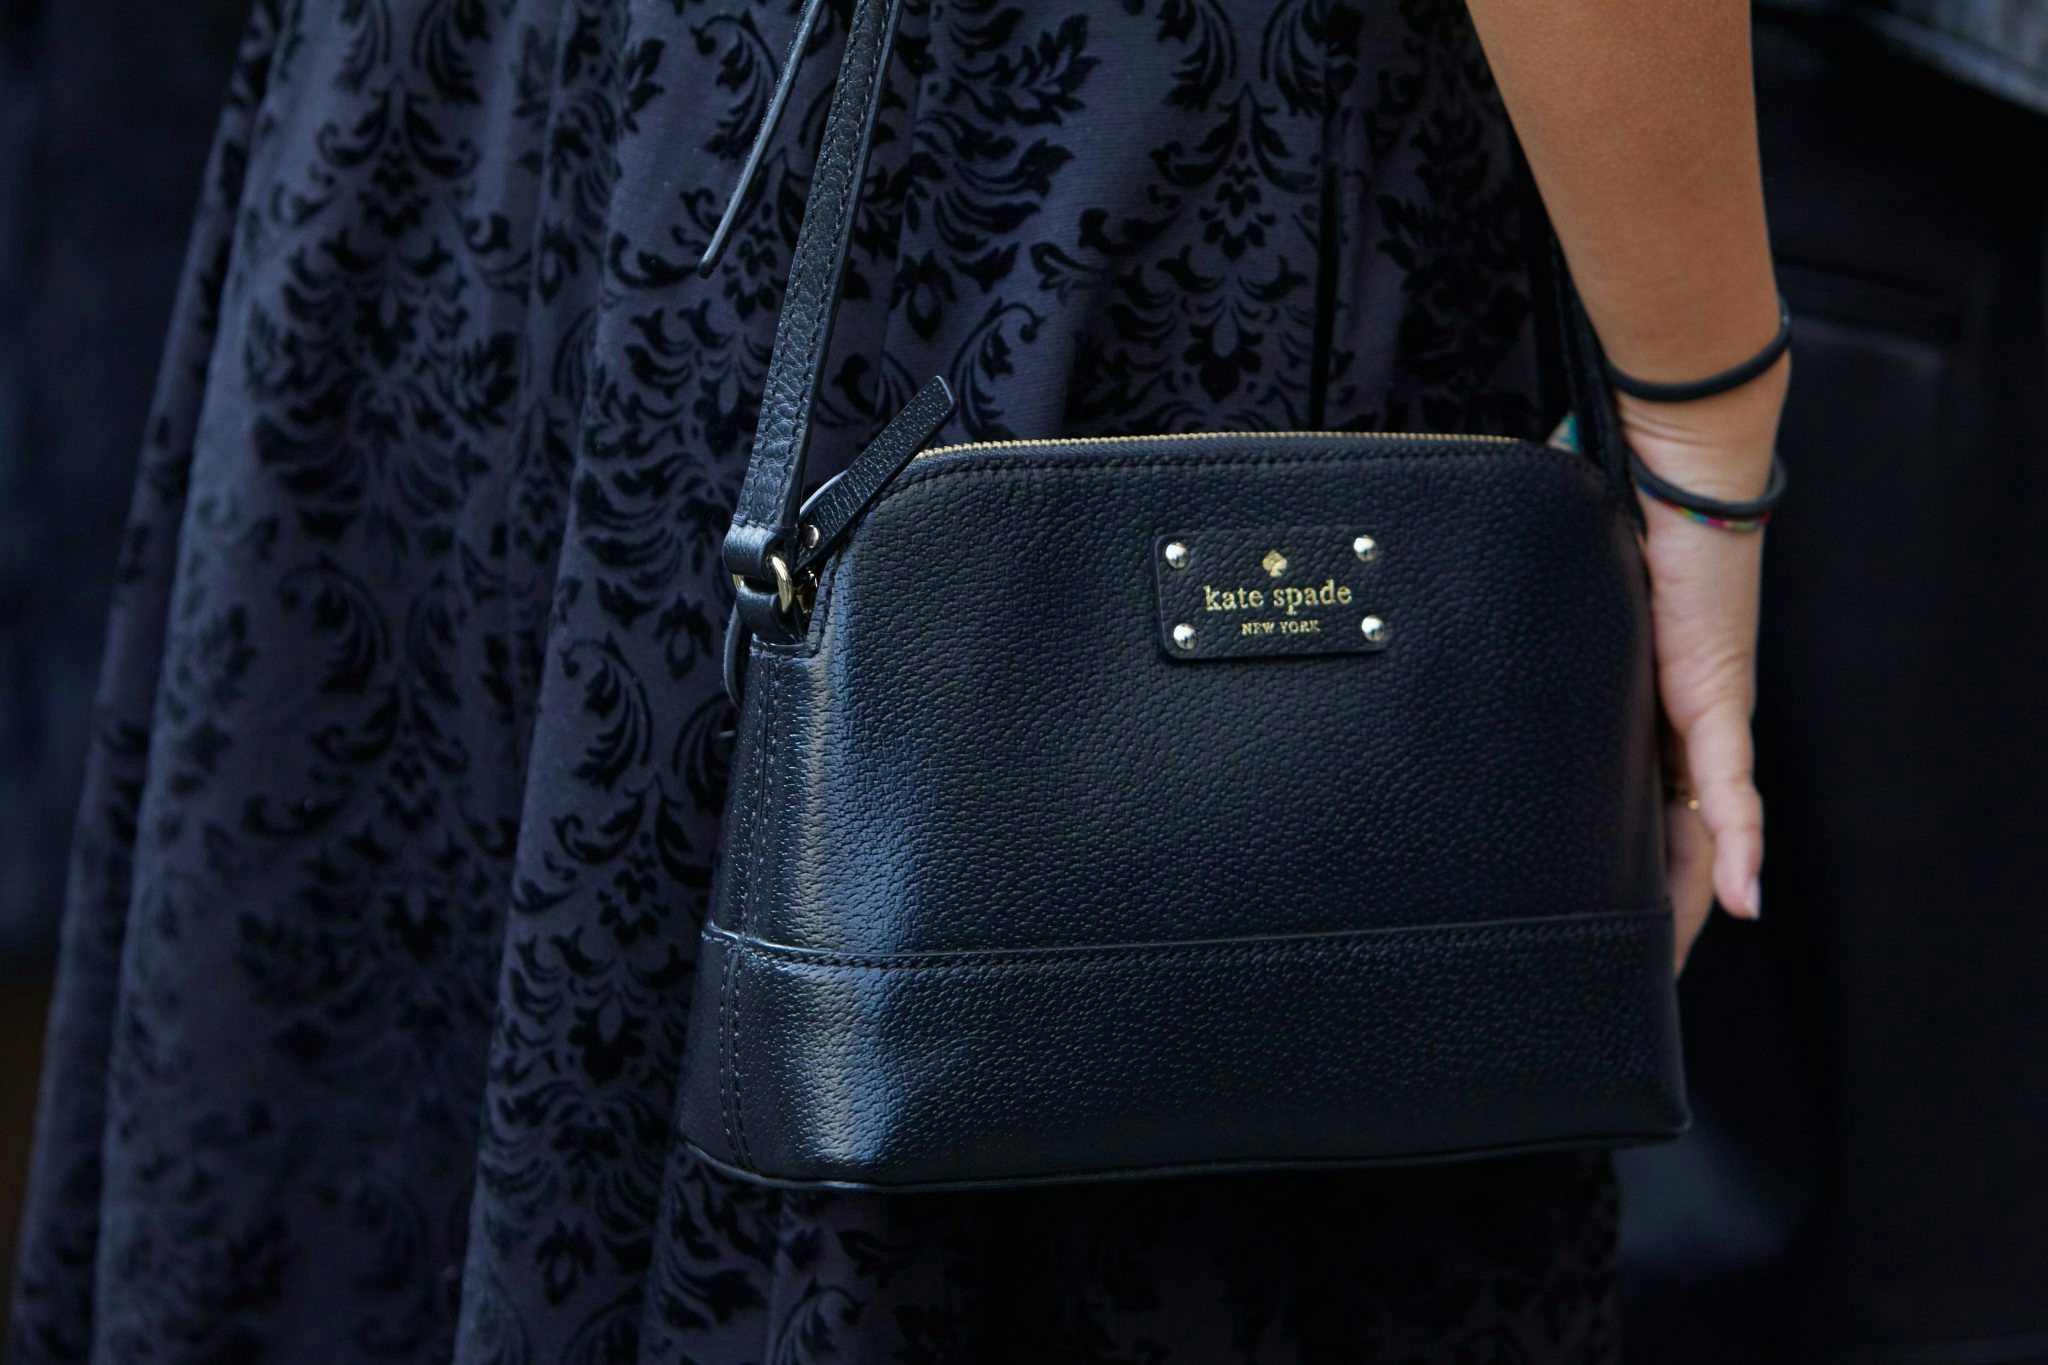 A problem often overlooked is their weaning desirability among the Chinese consumer - whose knowledge of affordable luxury brands started to shift long ago. A Kate Spade handbag. Photo: Shutterstock